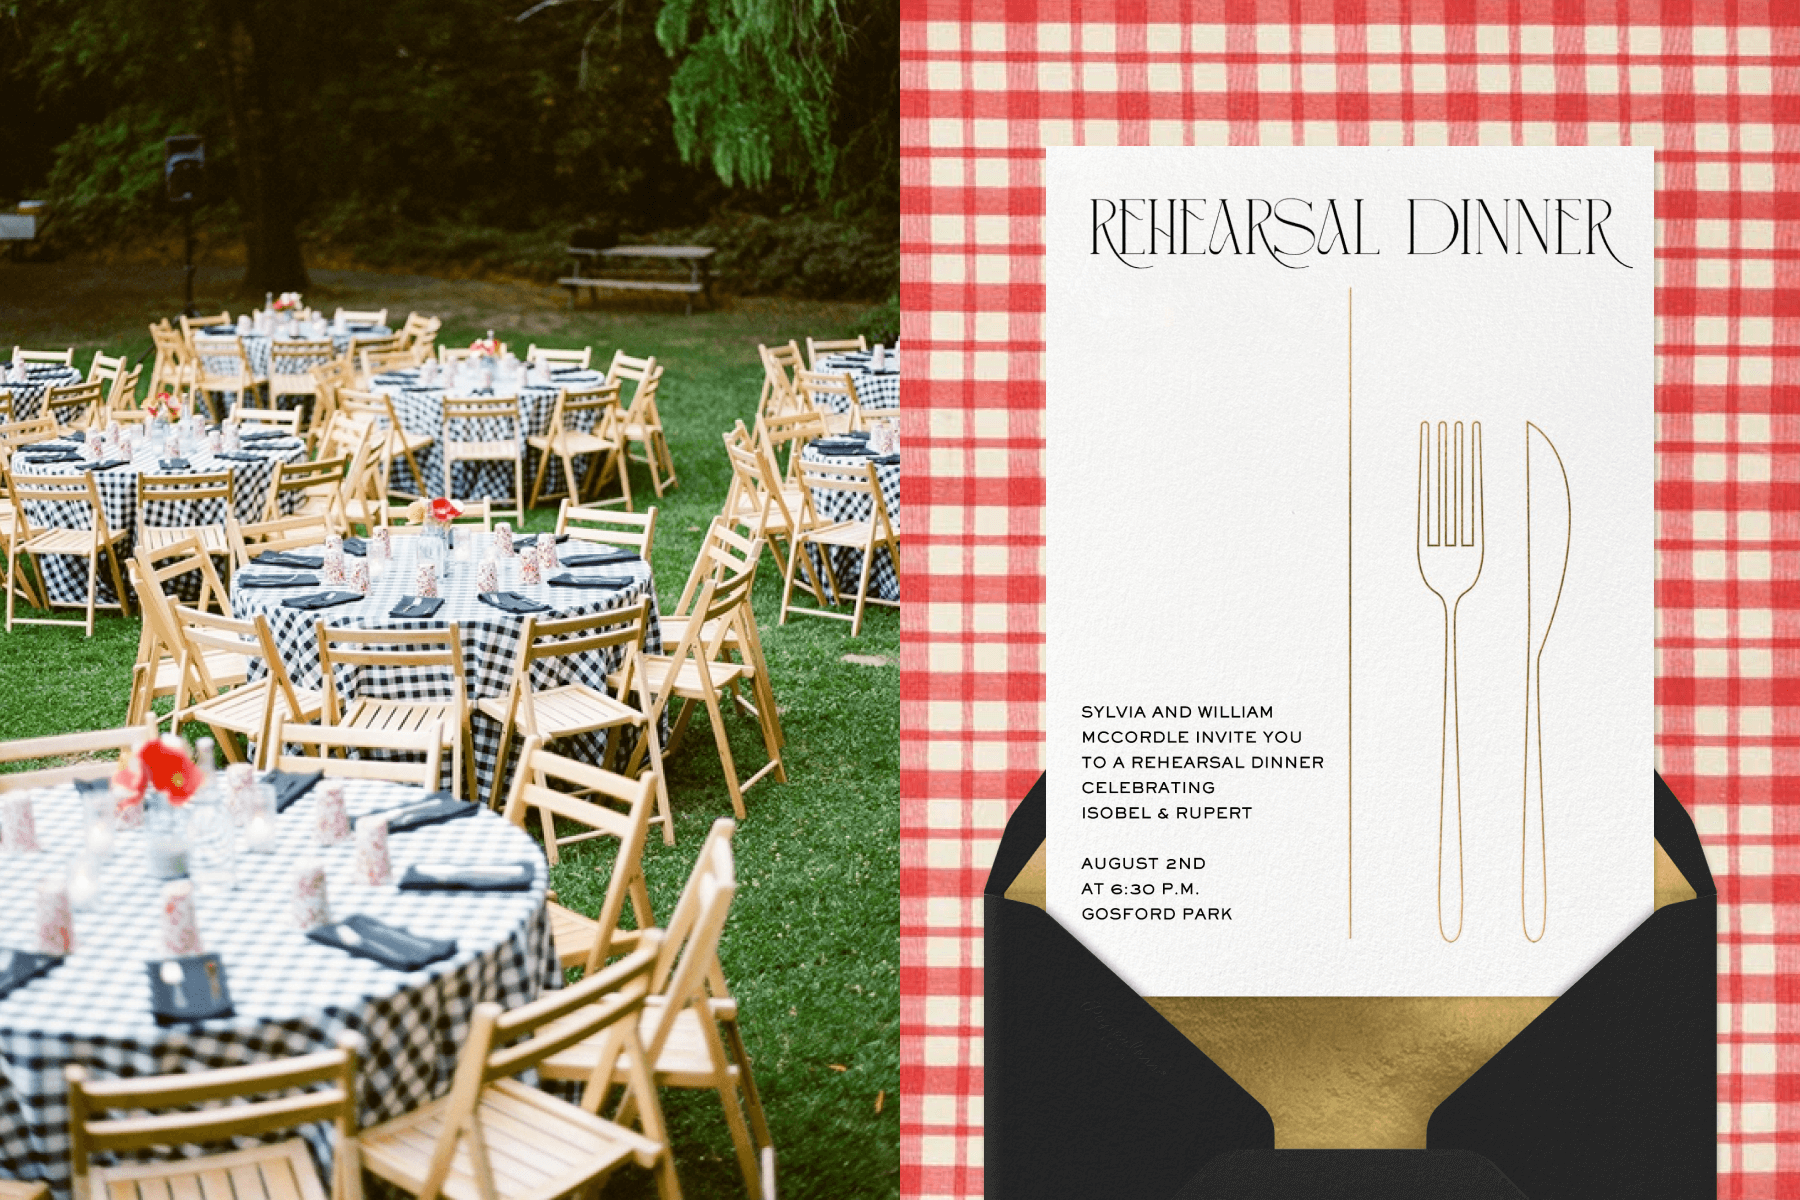 Left: Several round tables in a grassy yard are set with gingham tablecloths and simple place settings, surrounded by folding wooden chairs. Right: A rehearsal dinner invitation with a gold outline of a fork and knife on a red gingham backdrop.